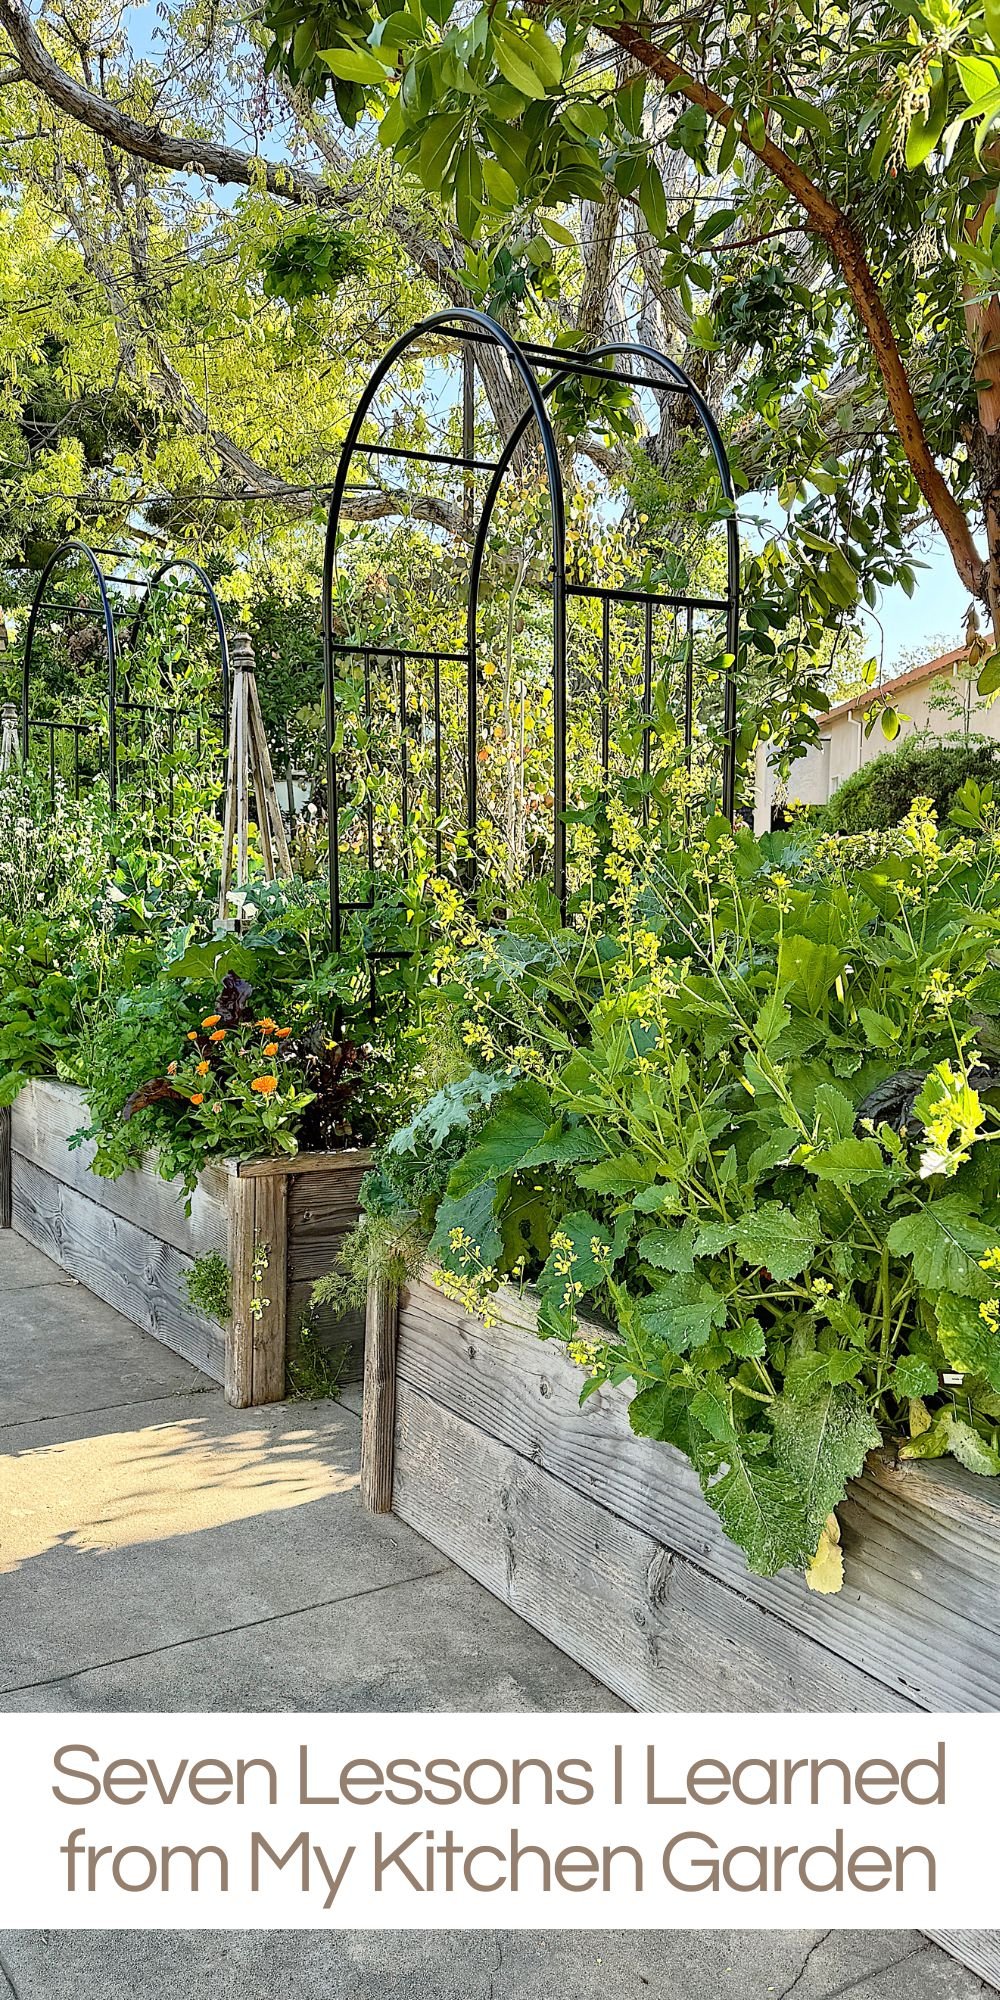 Two months ago, I embarked on a journey to plant a kitchen garden by taking an online class with Nicole at Gardenary and I have learned so much!